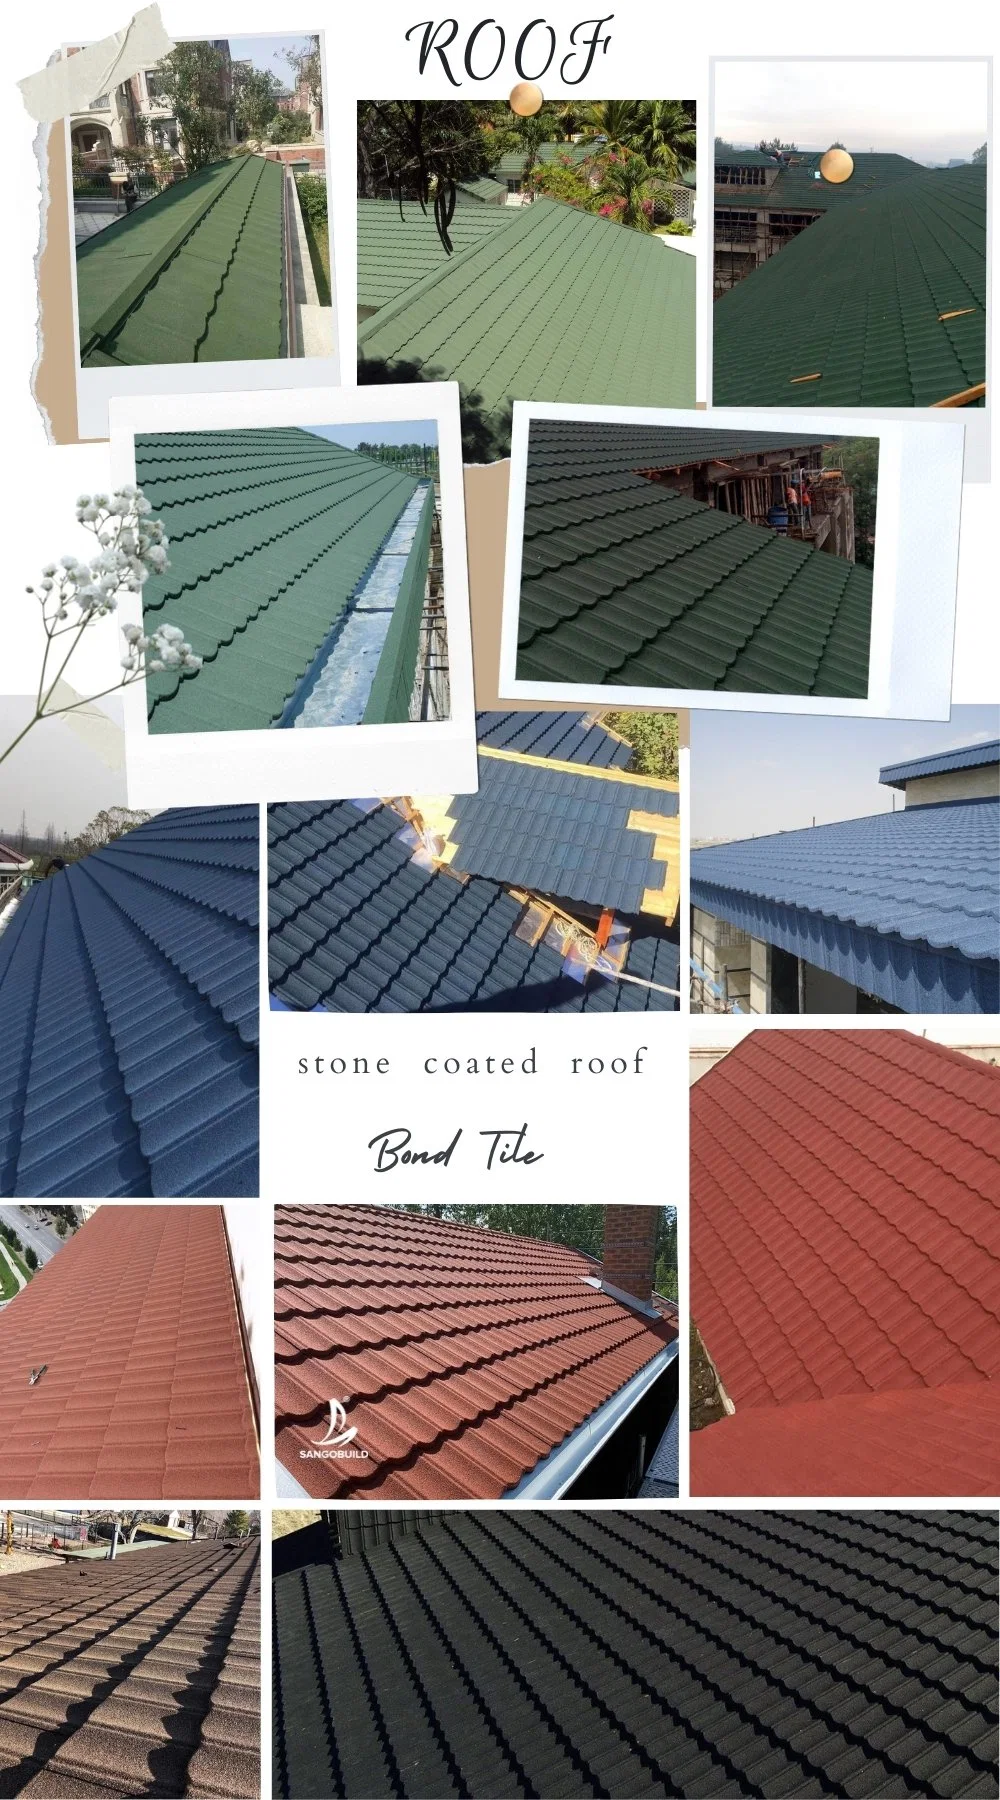 German Modern Durable Light Resistant Cold/ Hot Corrugated Sheet Classical Stone Coated Metal Roof Tile